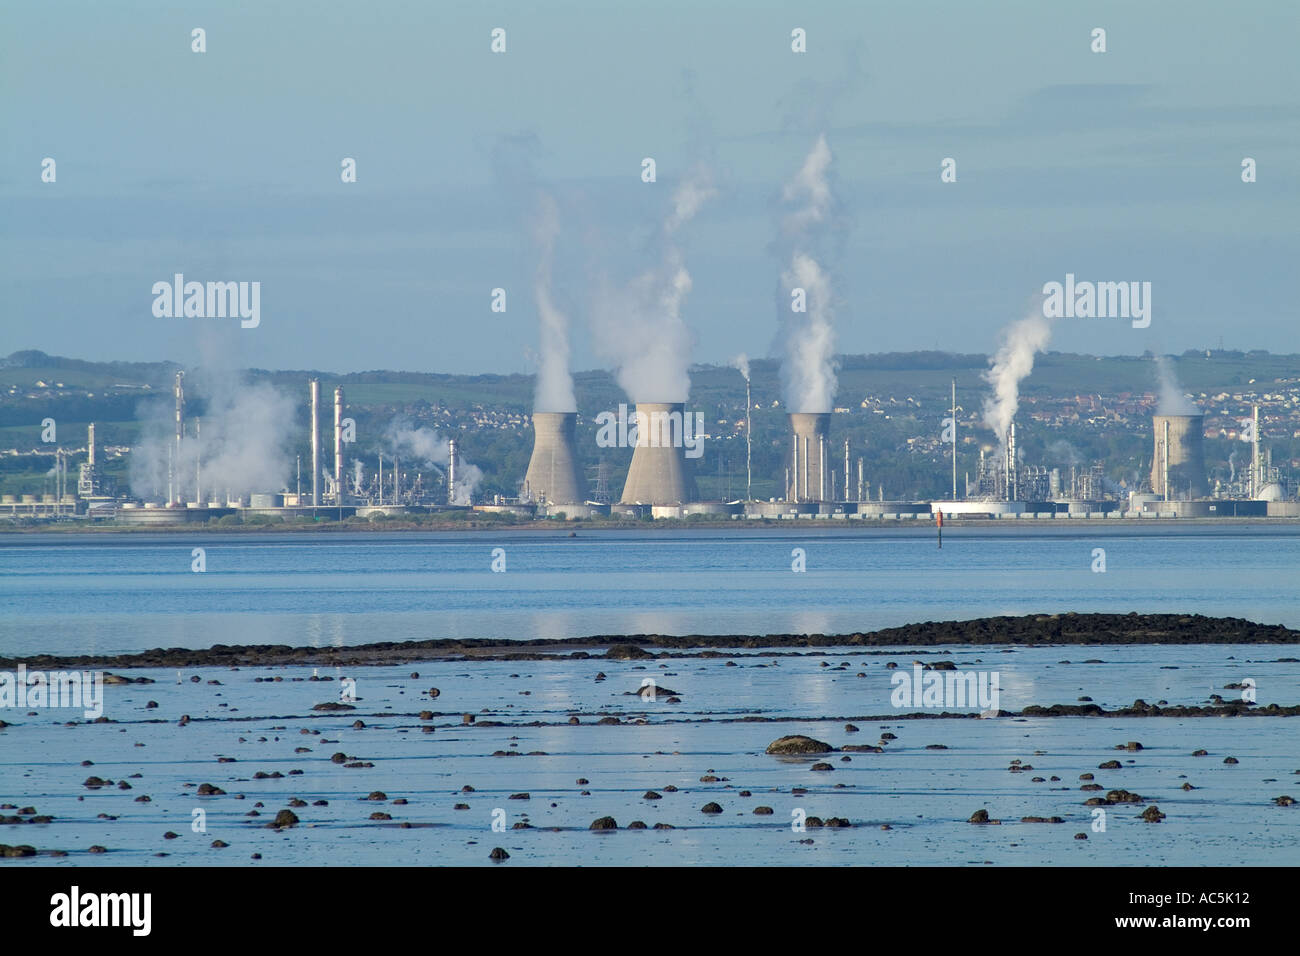 dh BP Petrochemische Raffinerie GRANGEMOUTH STIRLINGSHIRE Oil Smokestack Emission Chemicals plant uk ineos Chemical plant Coast Stockfoto